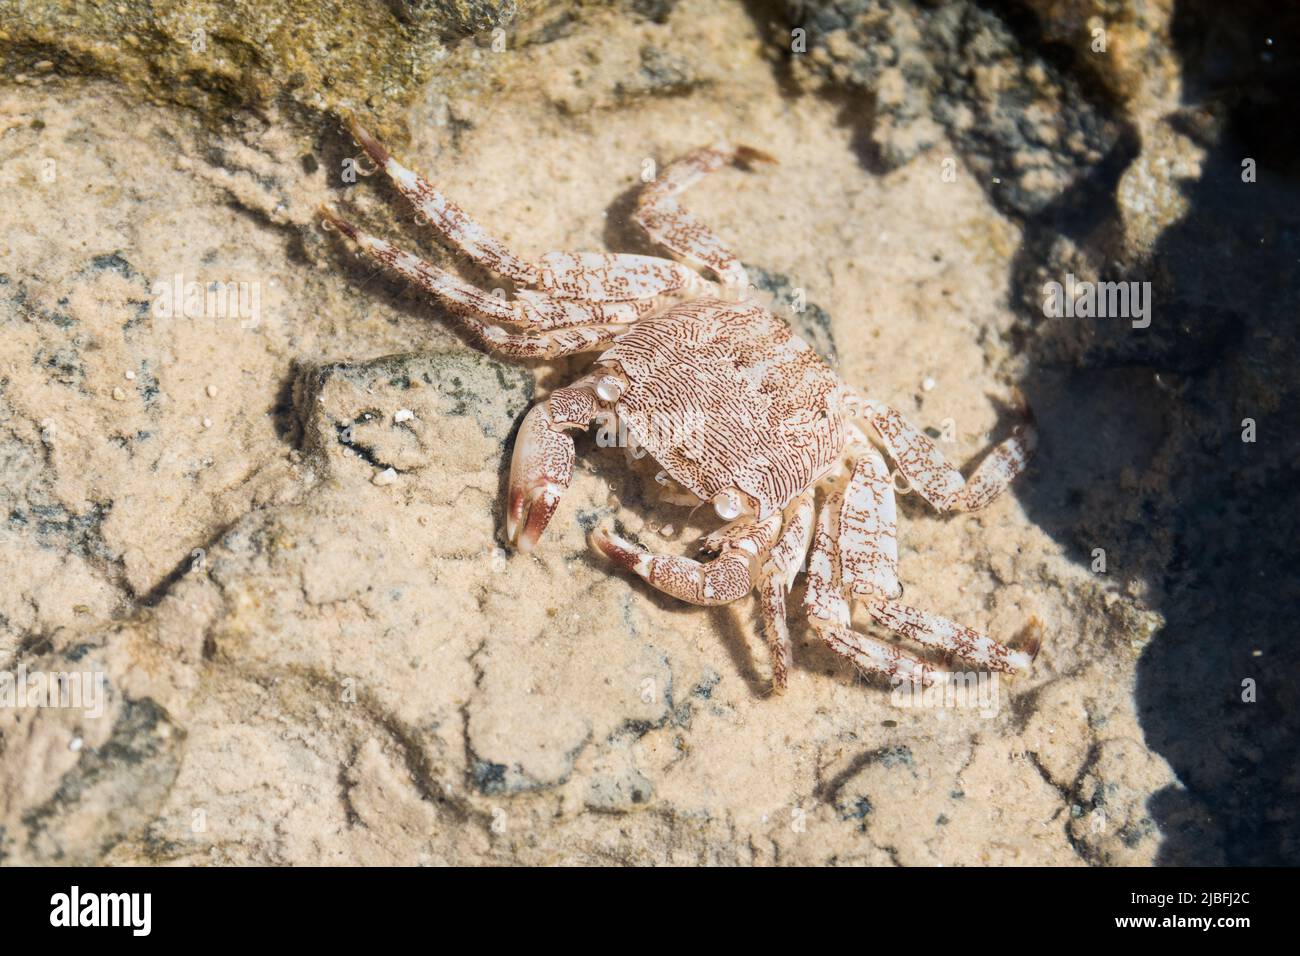 White, red-striped crab hiding in a saltwater puddle in the rock formation on a beach. Chrissi island, Crete, Greece Stock Photo